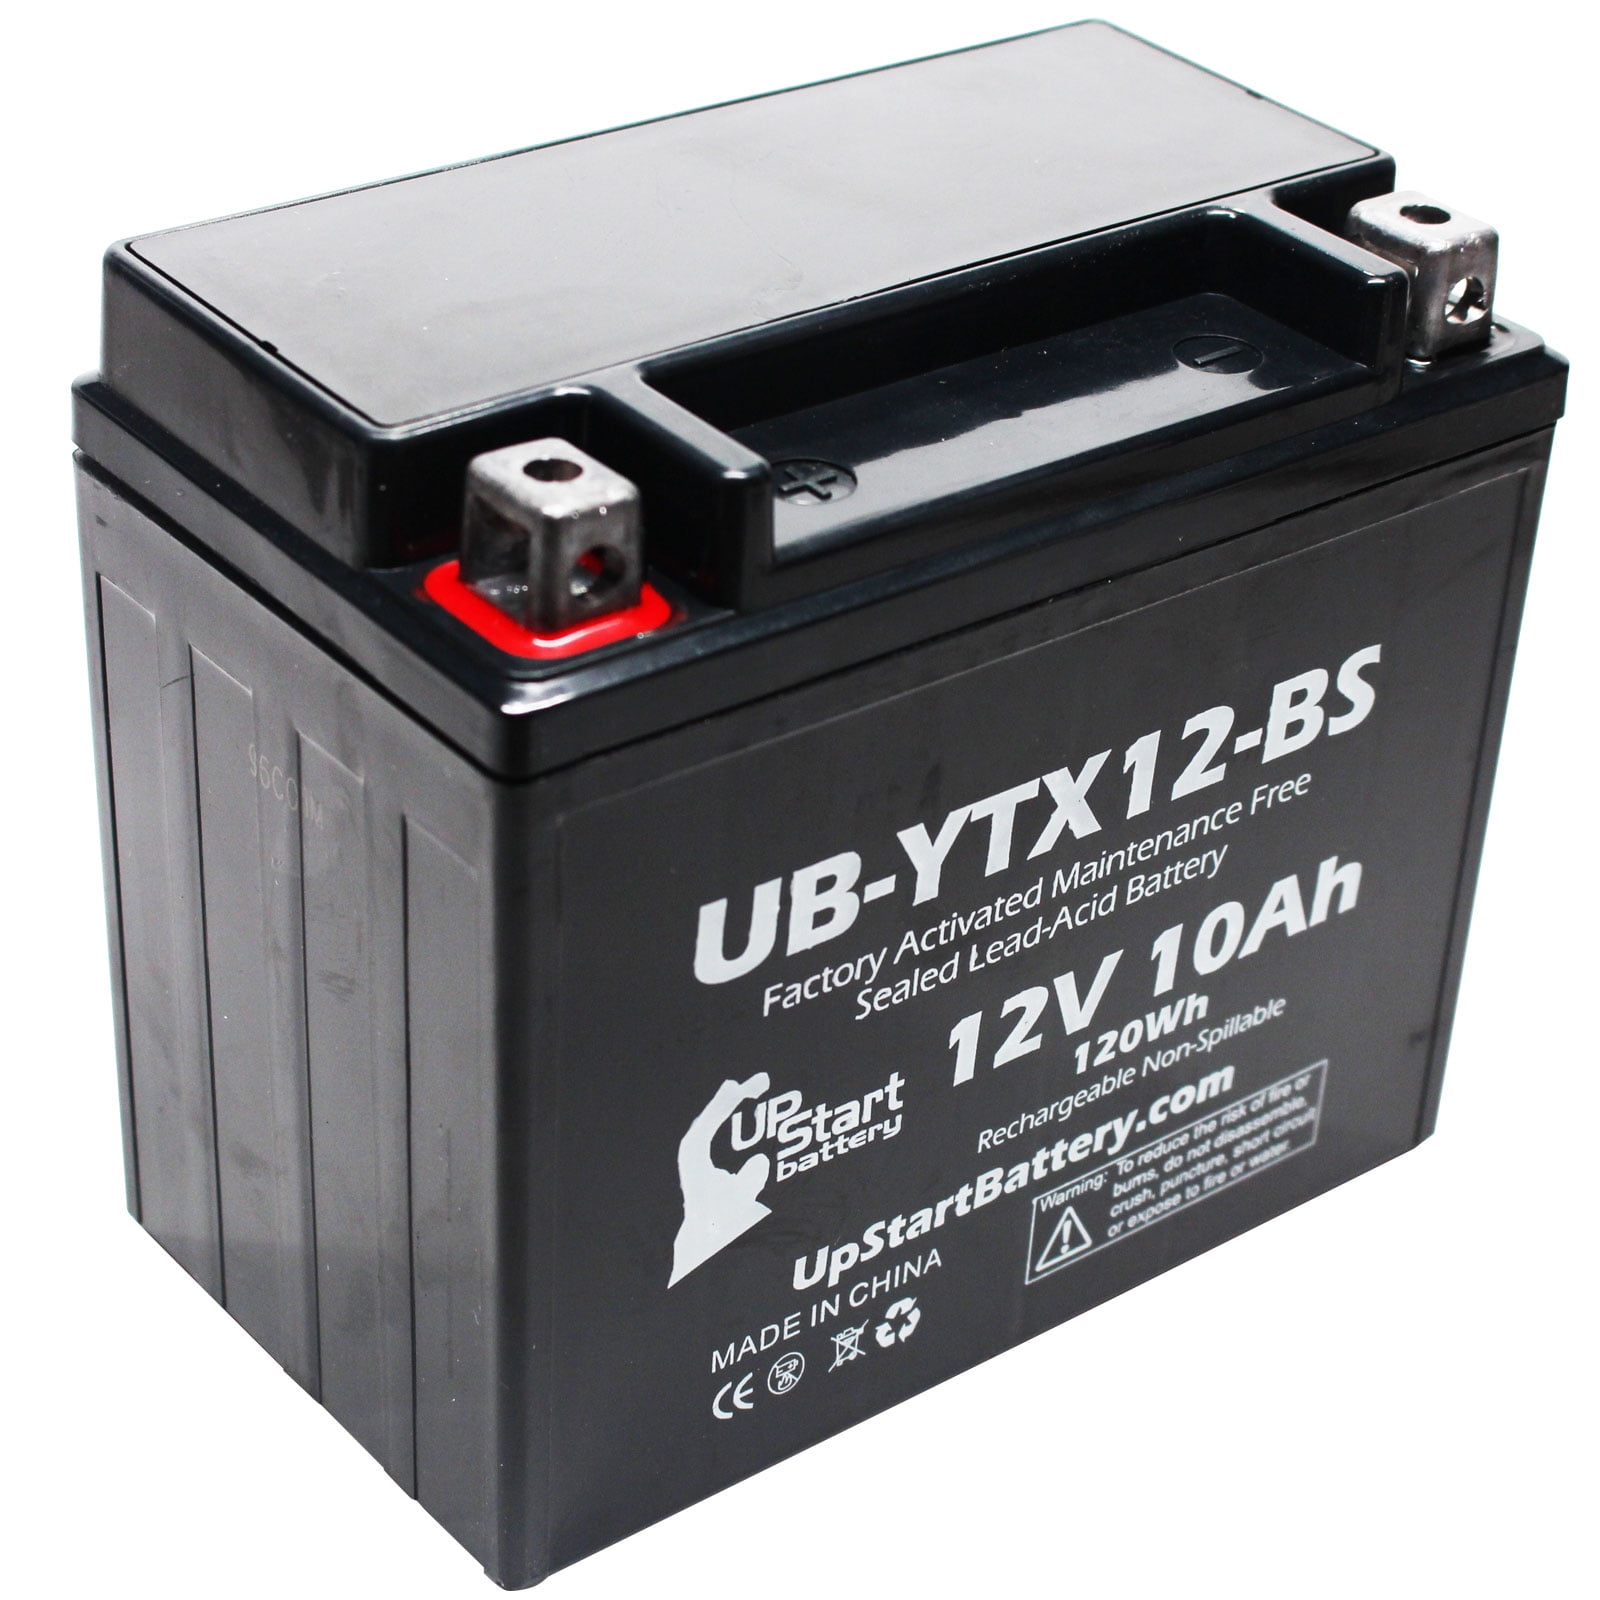 UpStart Battery Replacement 1996 Honda VF750C, C2, D Magna 750 CC Factory  Activated, Maintenance Free, Motorcycle Battery - 12V, 10Ah, UB-YTX12-BS -  